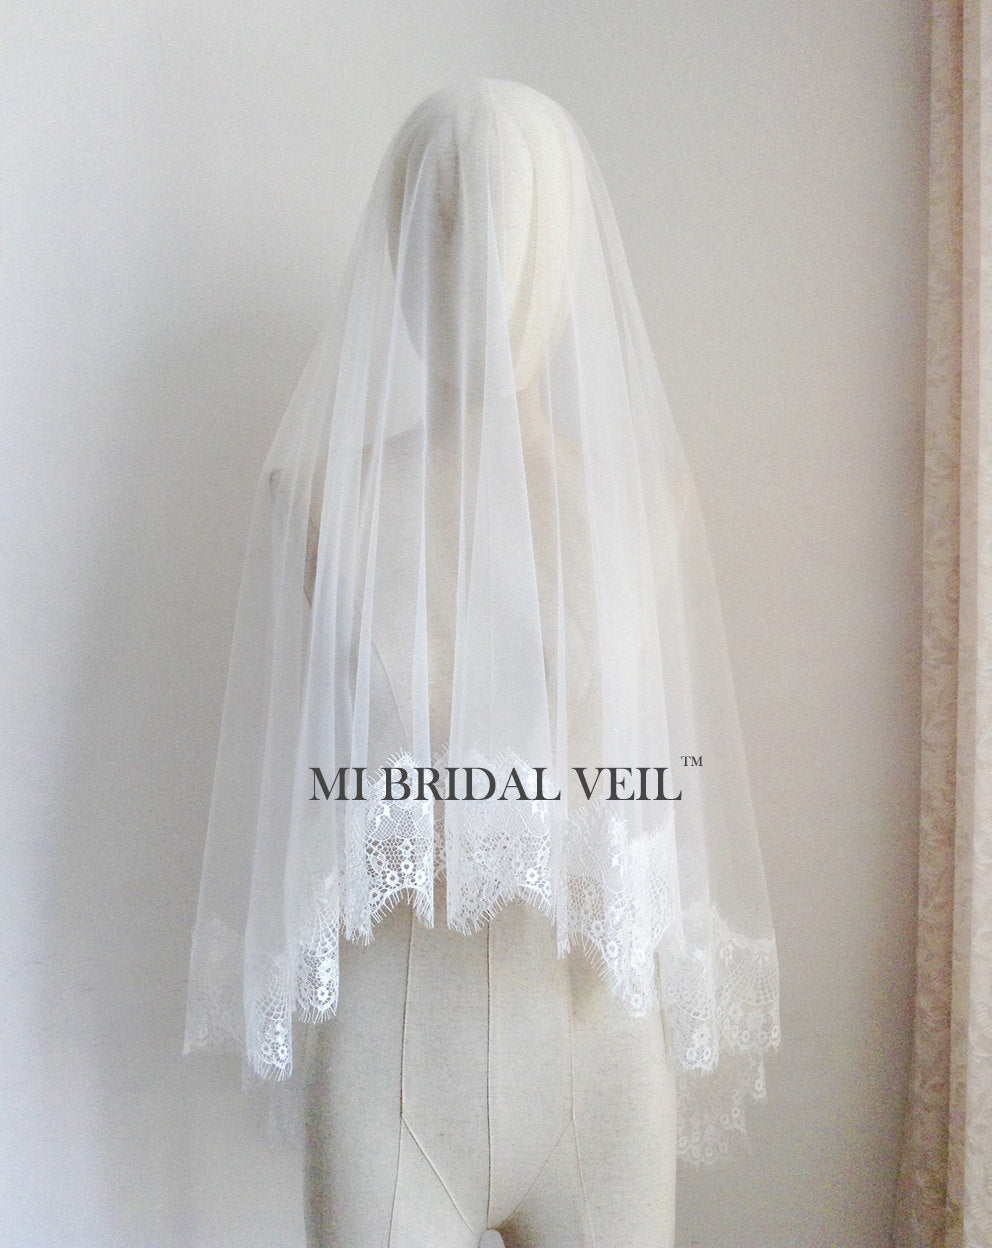 One Blushing Bride Cathedral Mantilla Veil with Eyelash Lace Trim, Lace Wedding Veil White / 108 inch Cathedral / with Beading